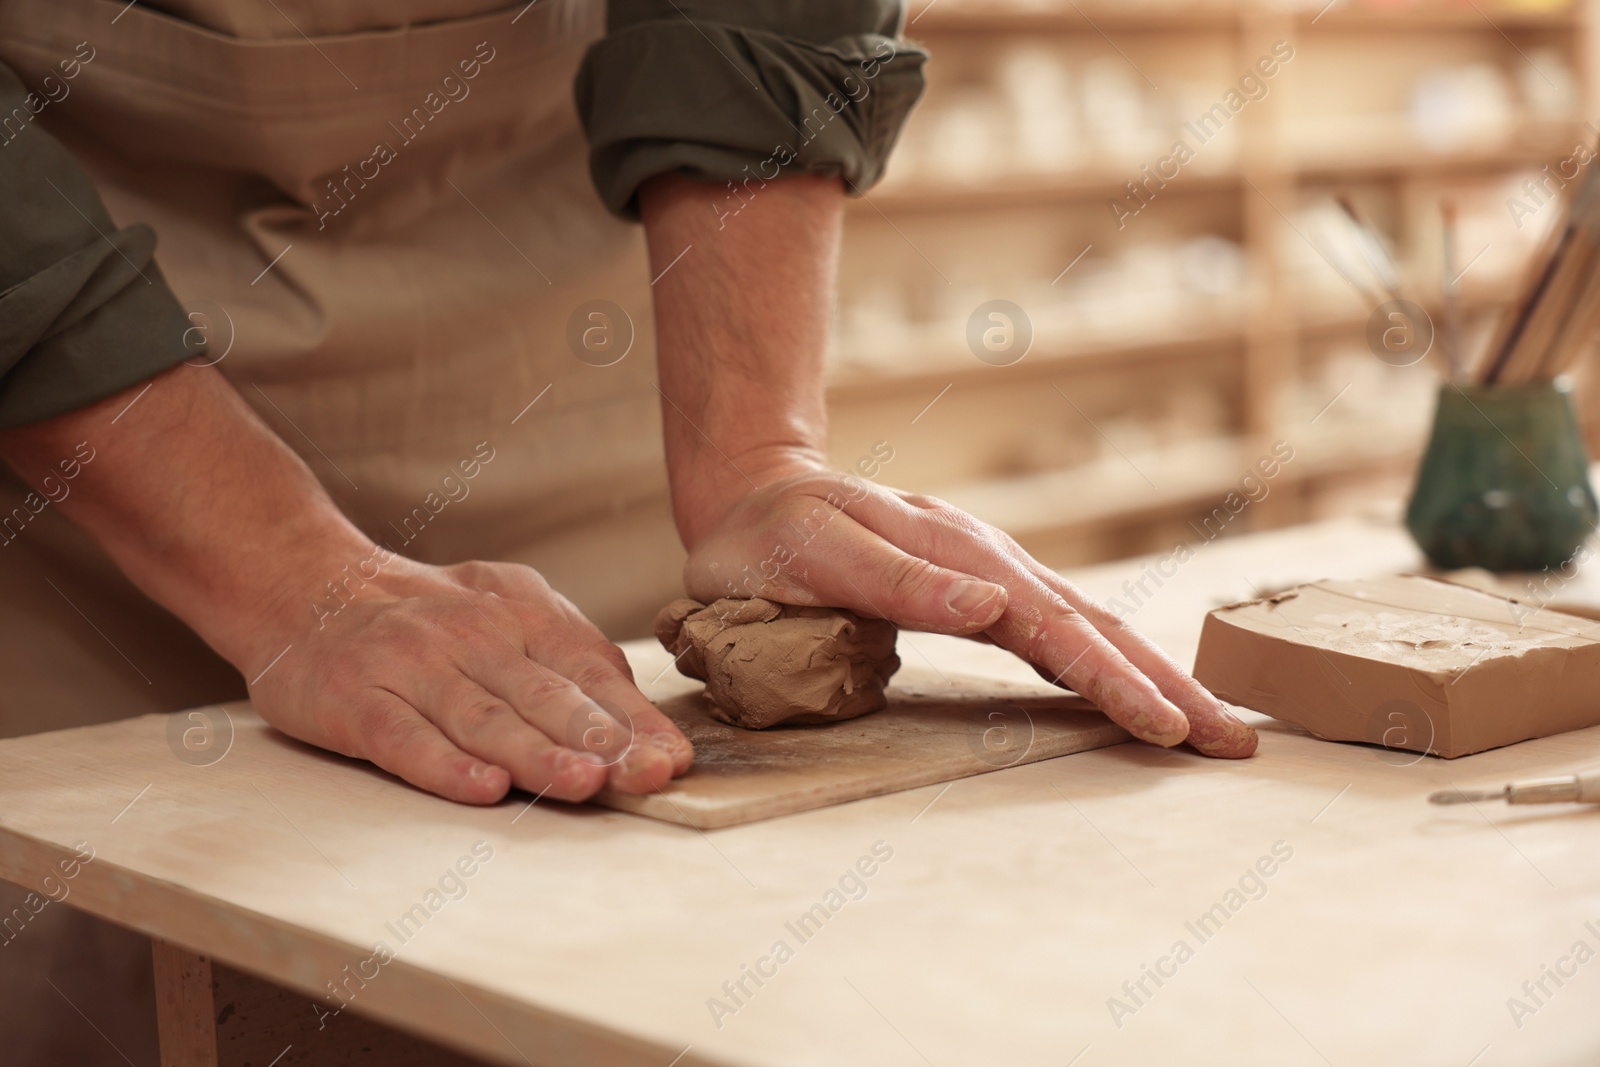 Photo of Man crafting with clay at table indoors, closeup